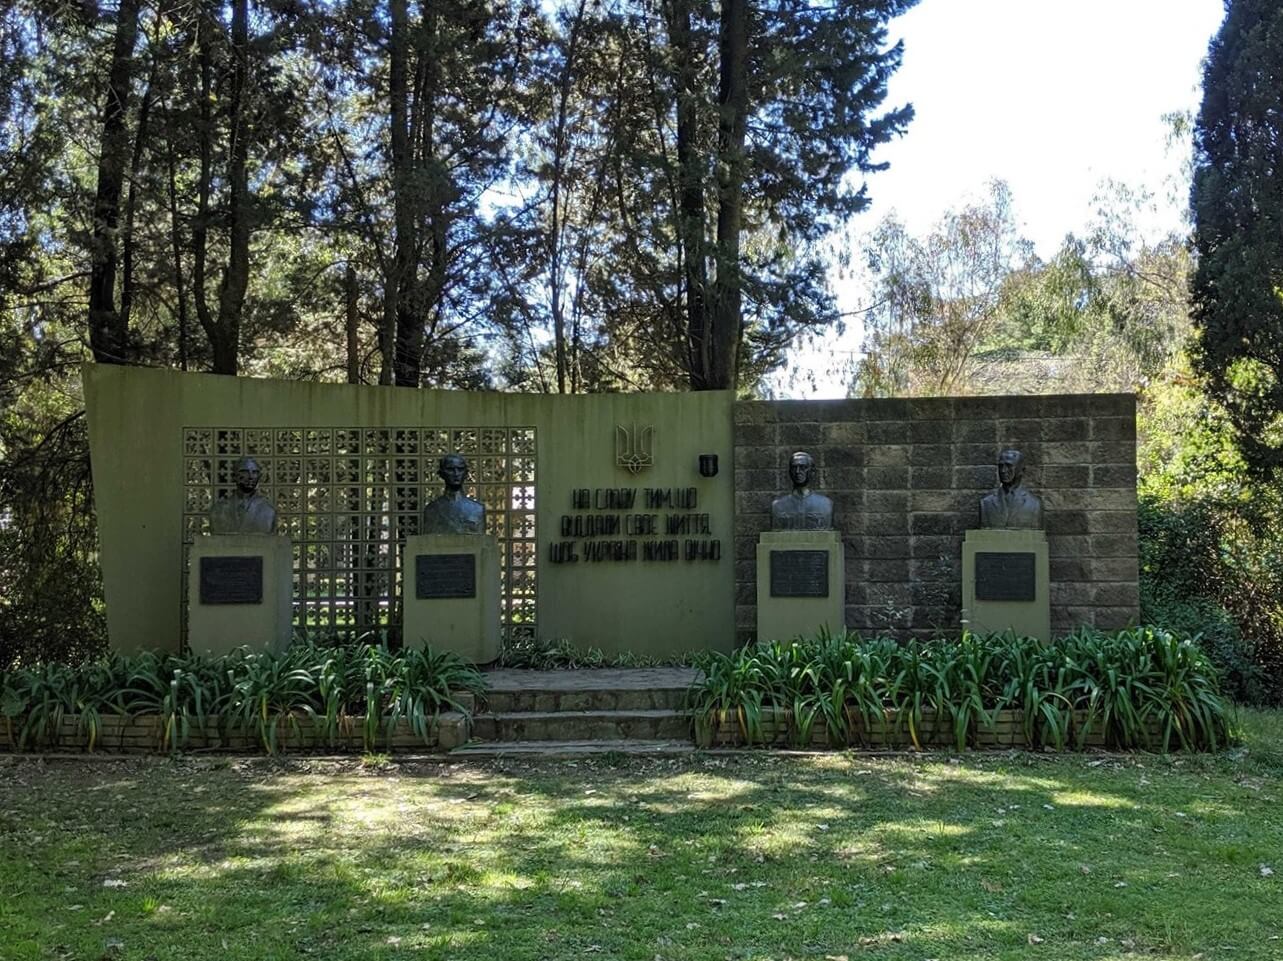 Monument “to the glory of those who gave their lives so that Ukraine could live forever,” with busts of Stepan Bandera, far left, and Roman Shukhevych, second from left, Camp Veselka, Canning.